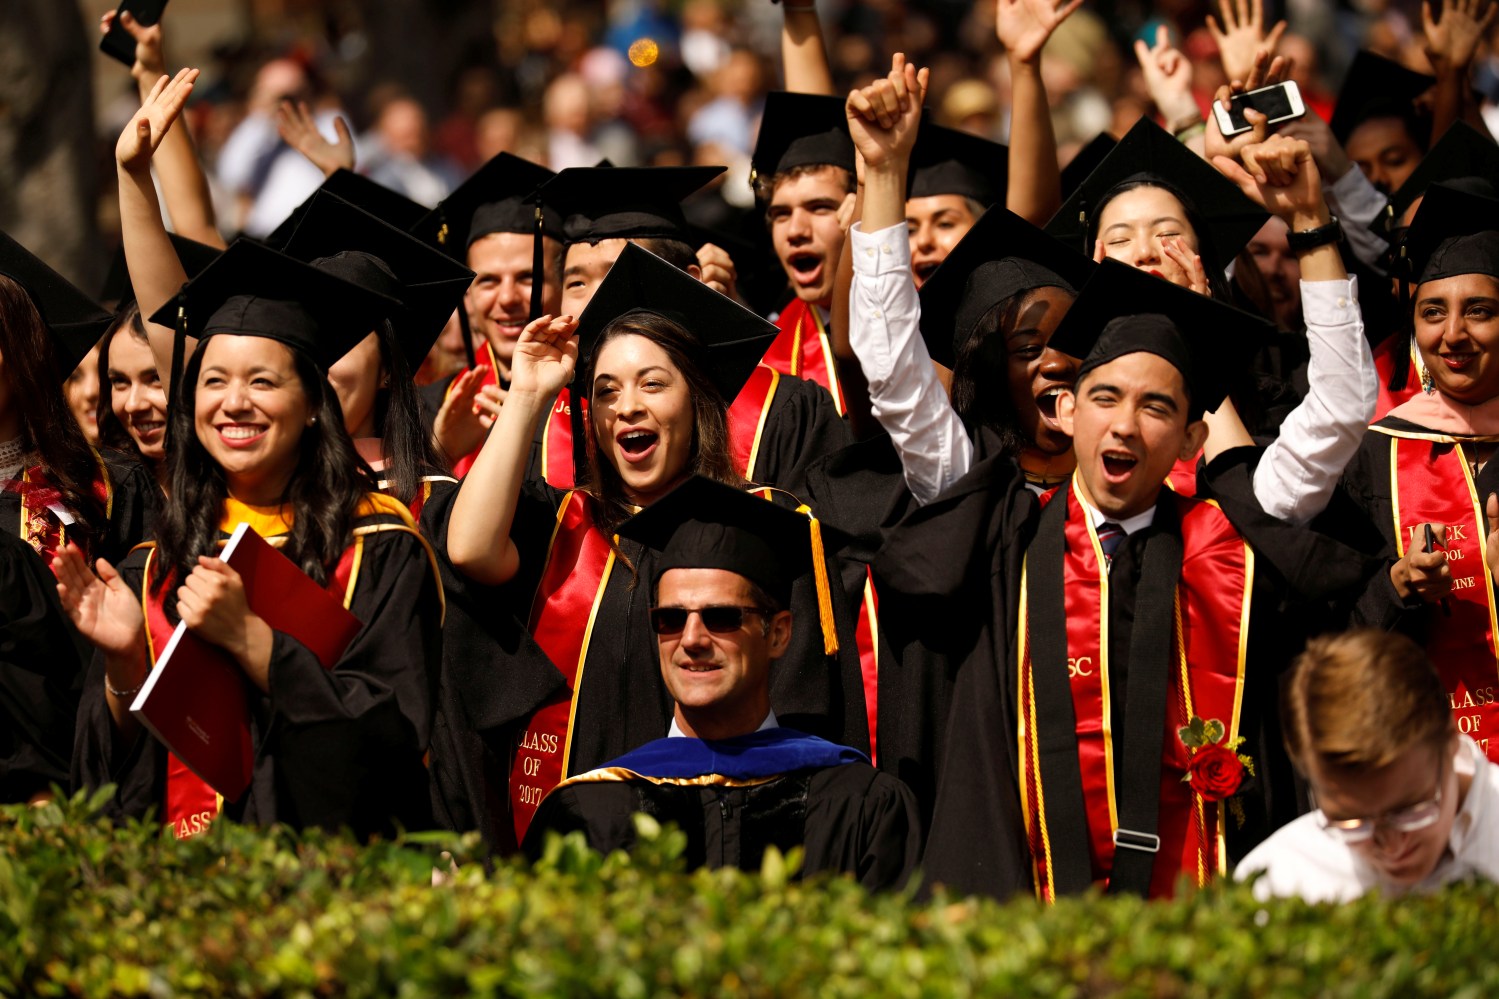 Graduates celebrate during the commencement ceremony at the University of Southern California (USC) in Los Angeles, California, U.S., May 12, 2017. REUTERS/Patrick T. Fallon - RC1EA96FB0C0